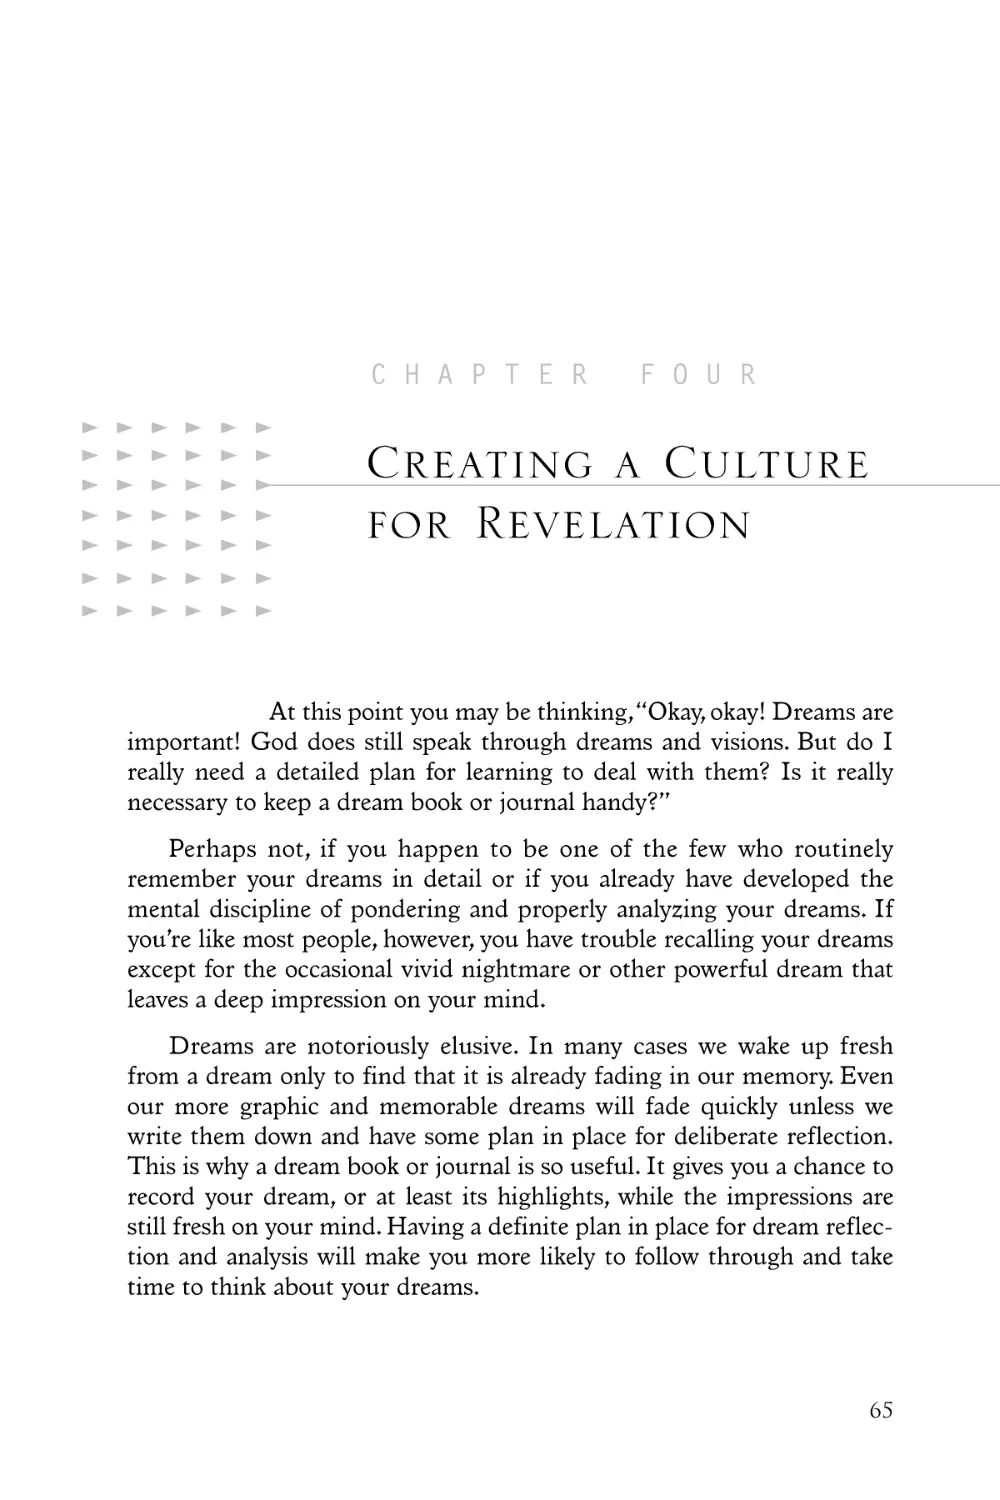 Creating a Culture for Revelation